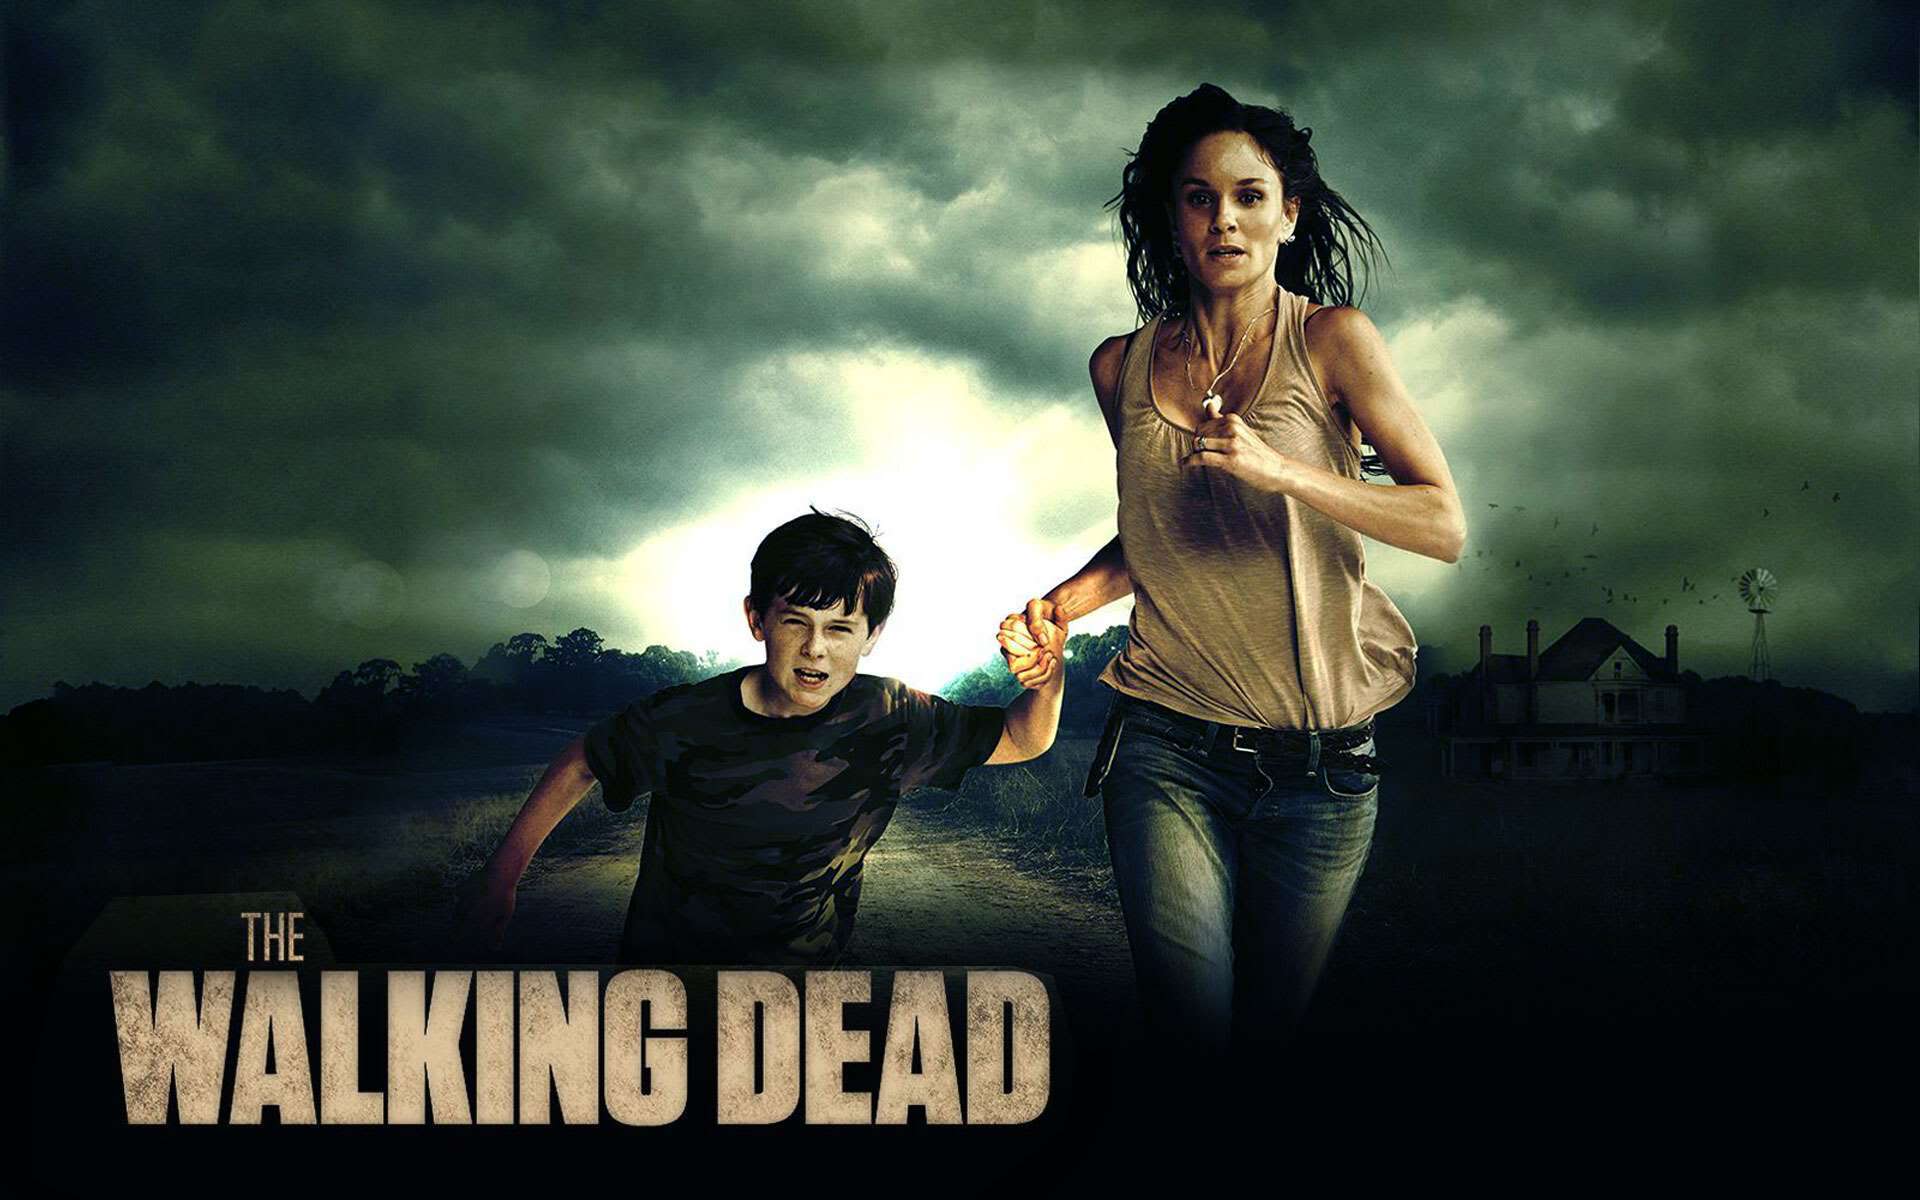 The Walking Dead Backgrounds   Wallpaper High Definition High